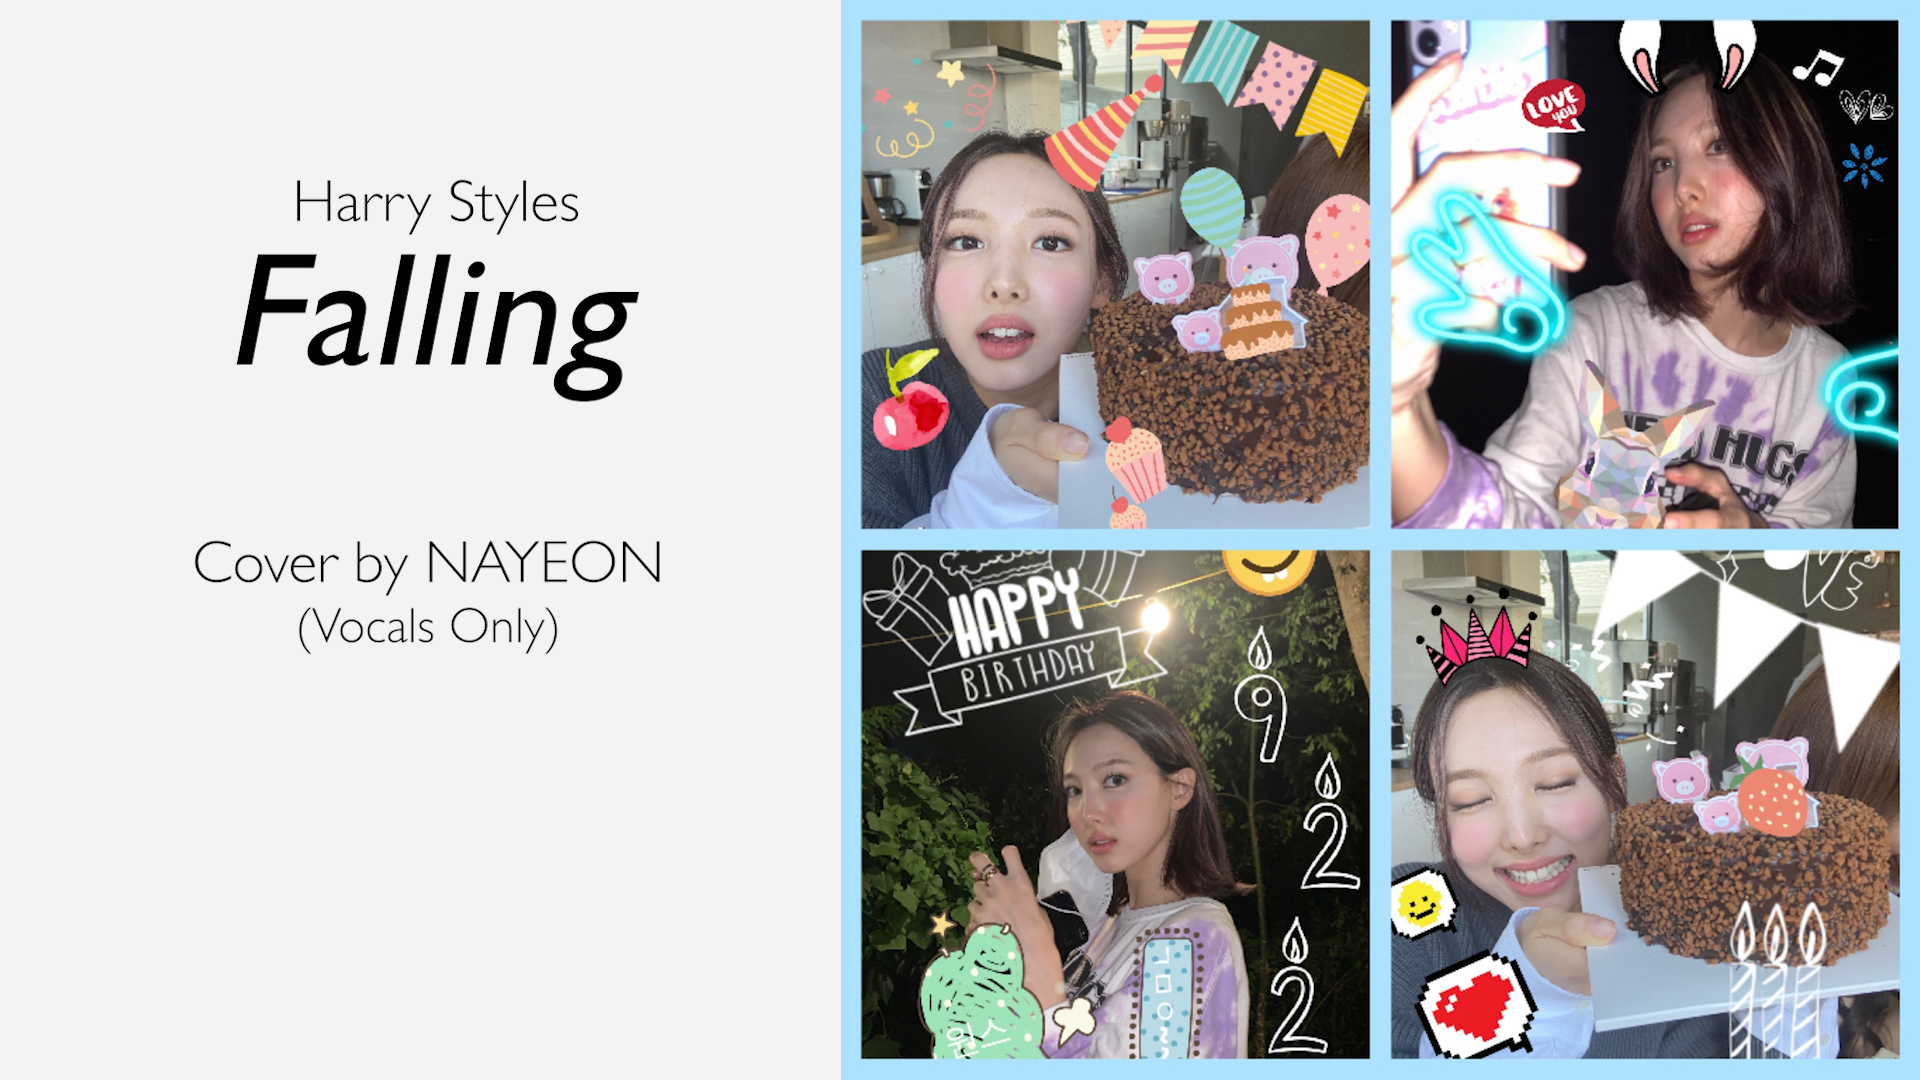 “Falling (Harry Styles)” Cover by NAYEON - Vocals Only